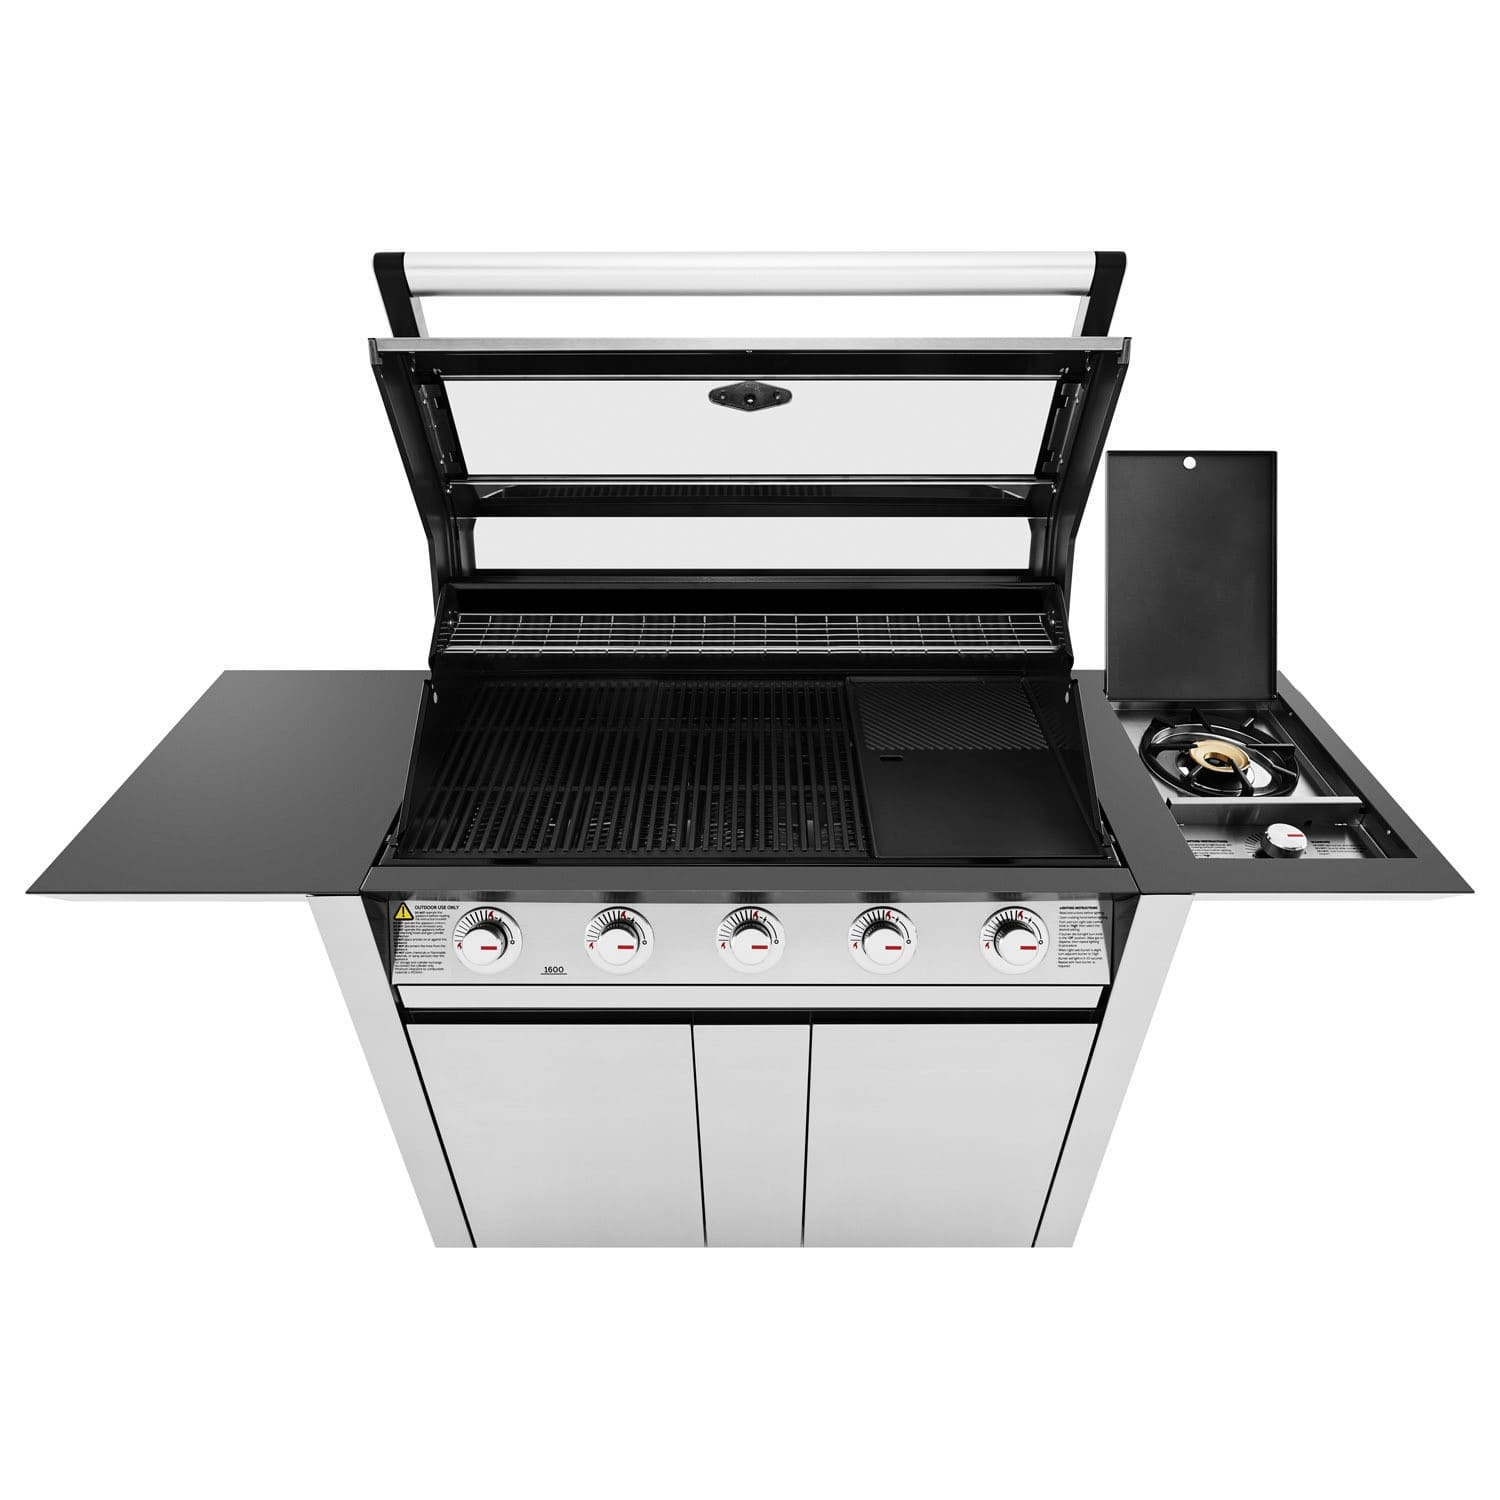 Beefeater 1600S Series - 5 Burner Gas Barbecue Grill and Trolley